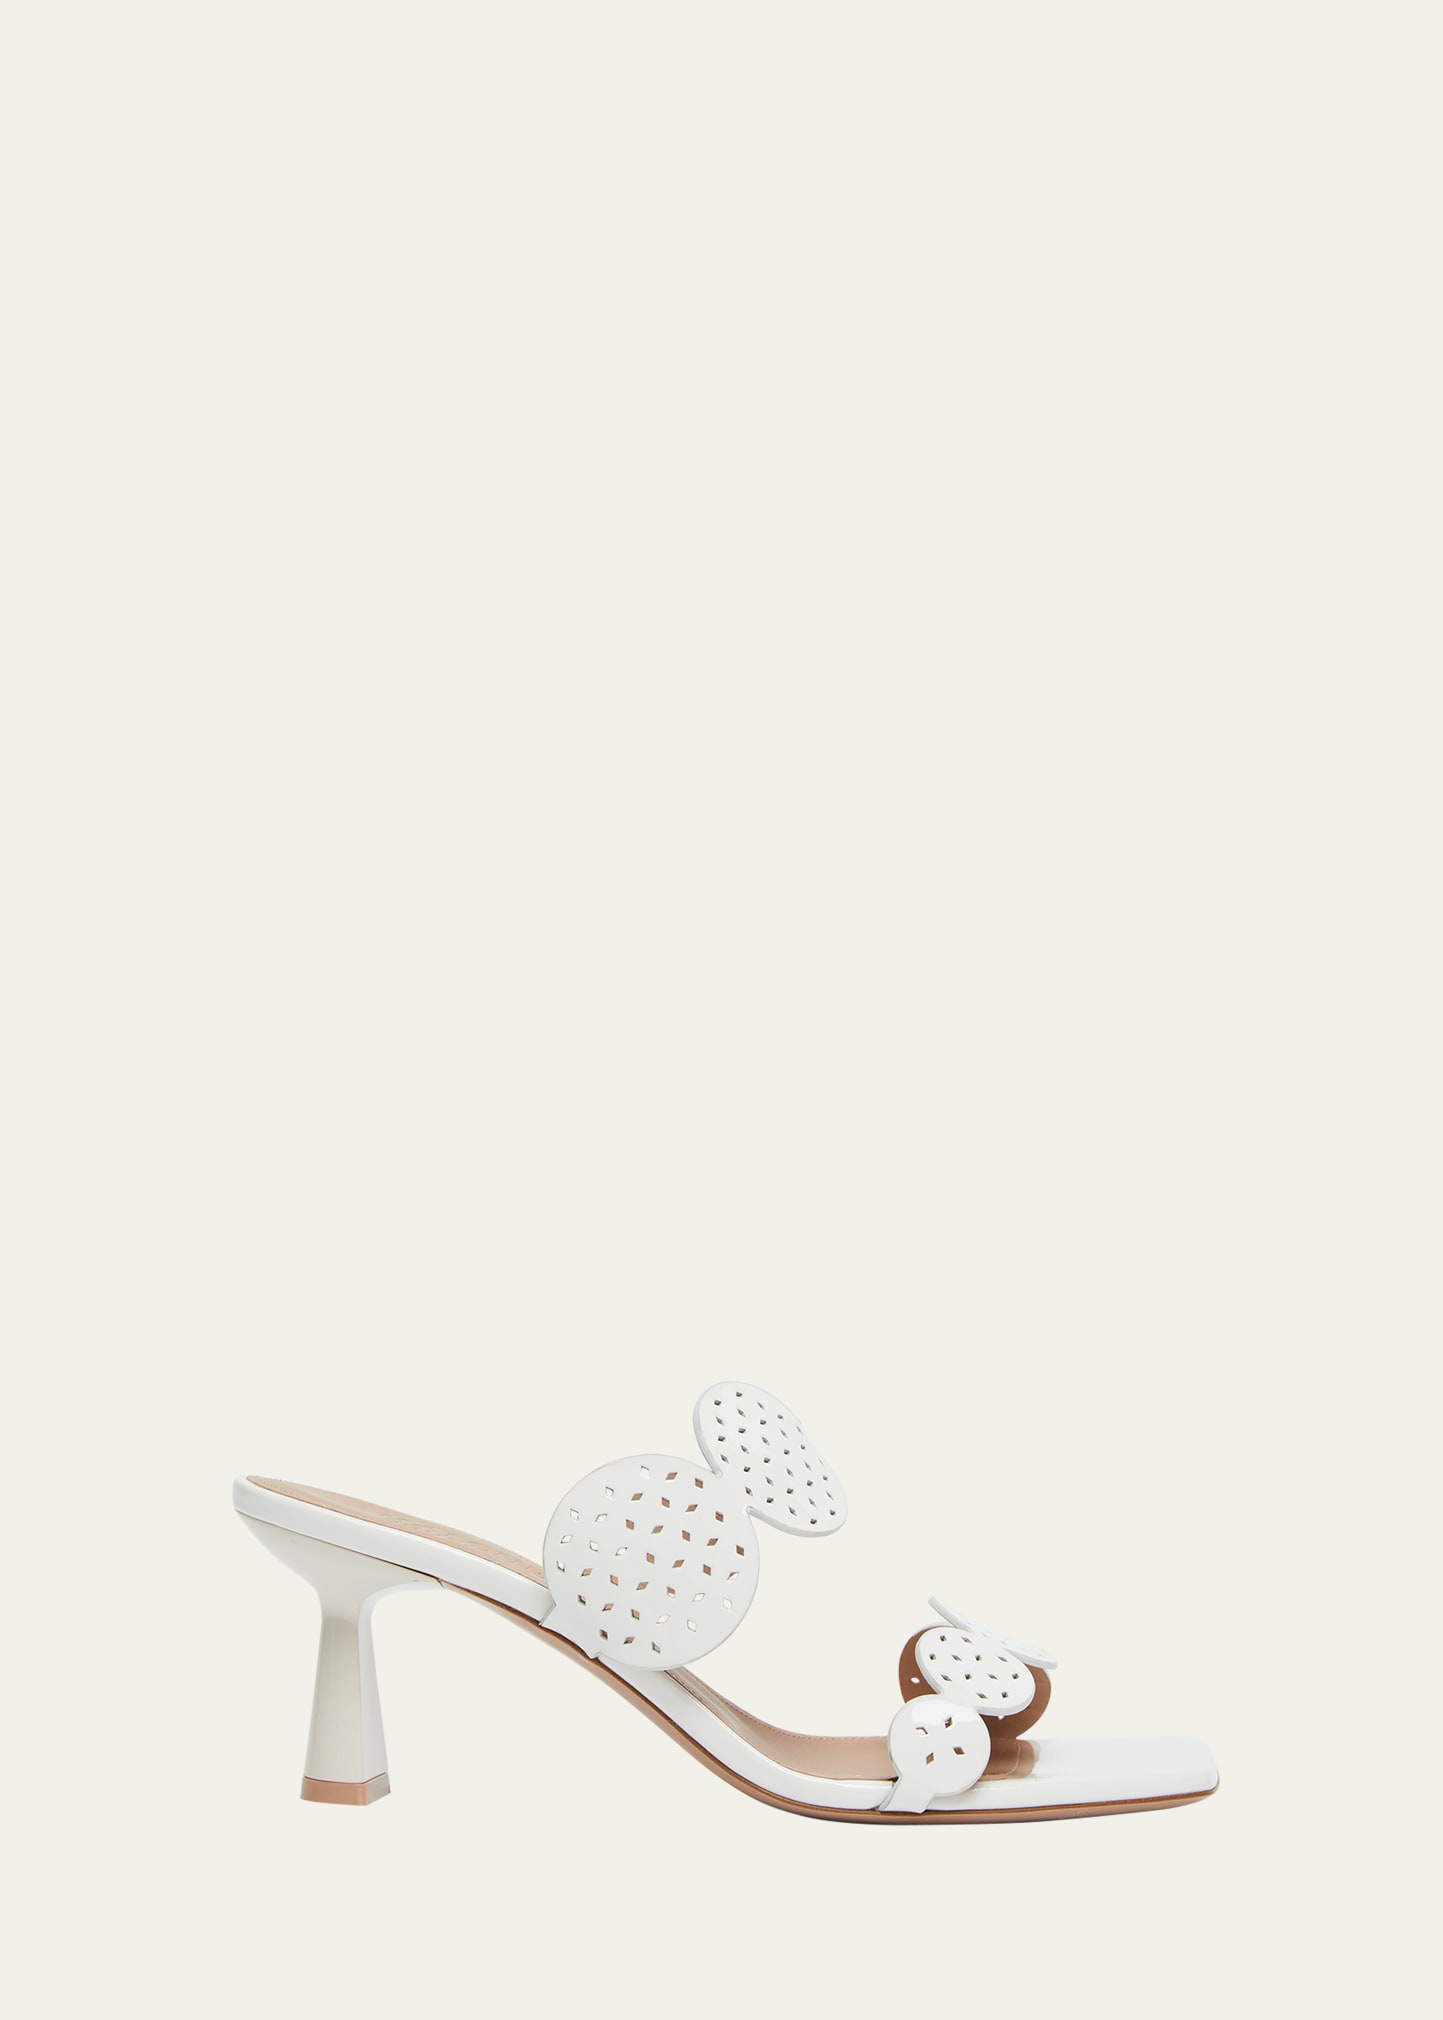 Malone Souliers Trish Perforated Patent Mule Sandals In Milk